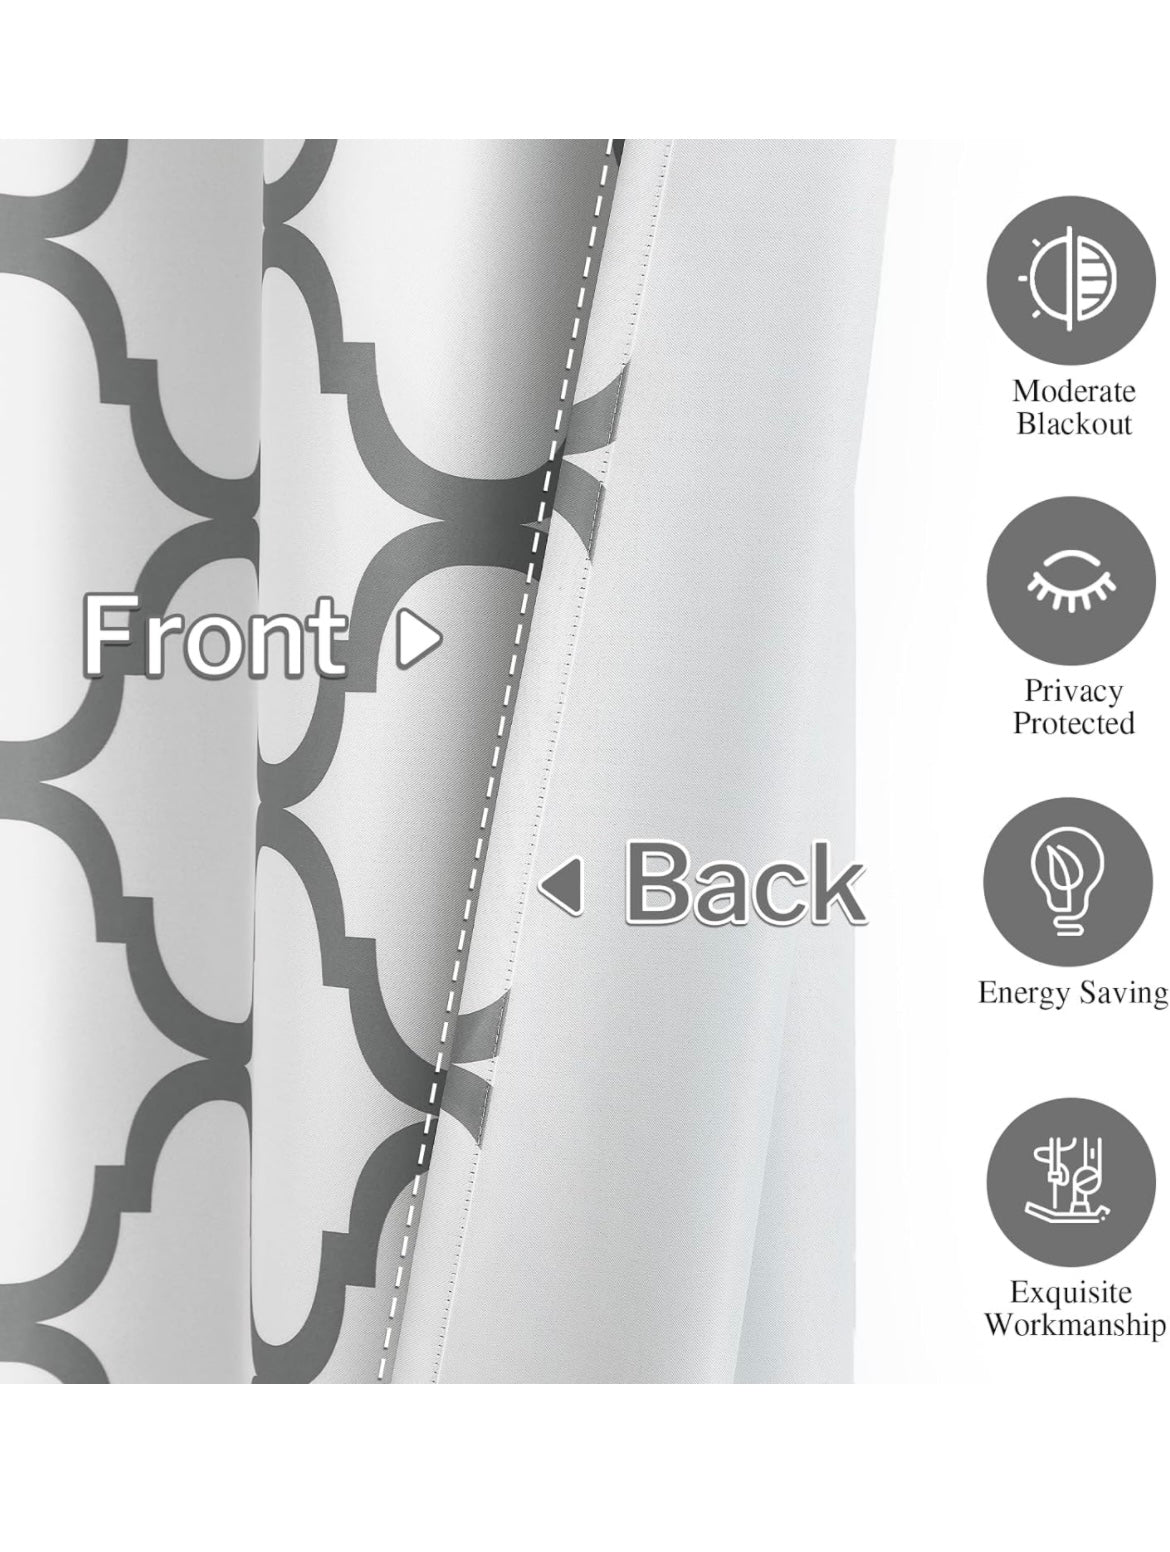 Melodieux Moroccan Printed Room Darkening Blackout Grommet Curtains for Living Room Bedroom, 52 by 84 Inch, Off White/Grey (2 Panels)